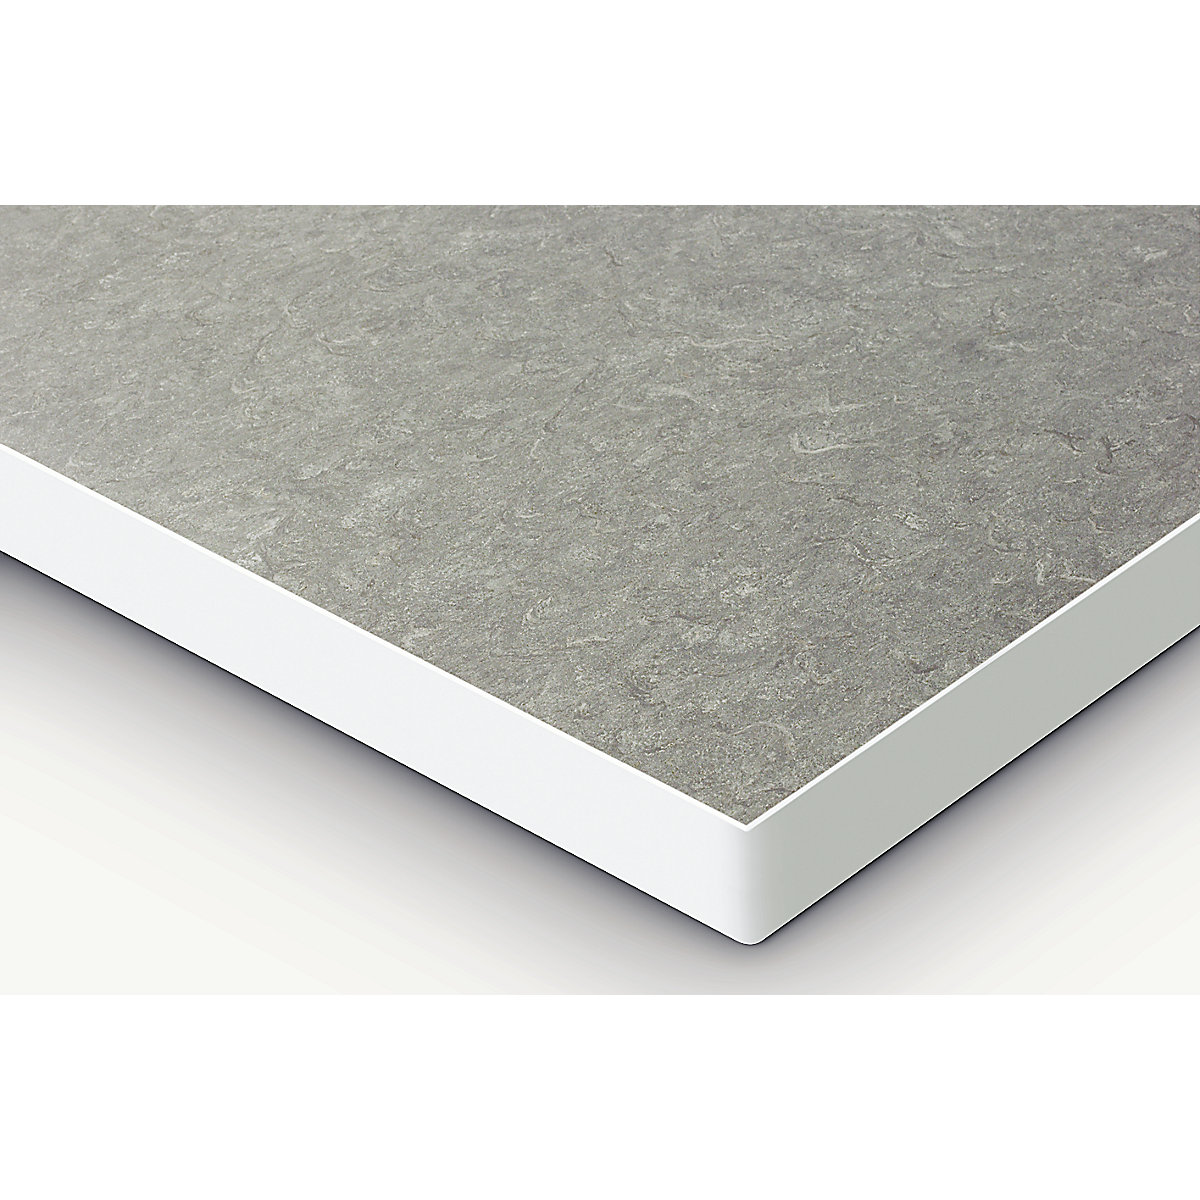 Linoleum cover – antistatic, hardwearing, flame retardant, resistant to oils and greases, all-round ABS edge